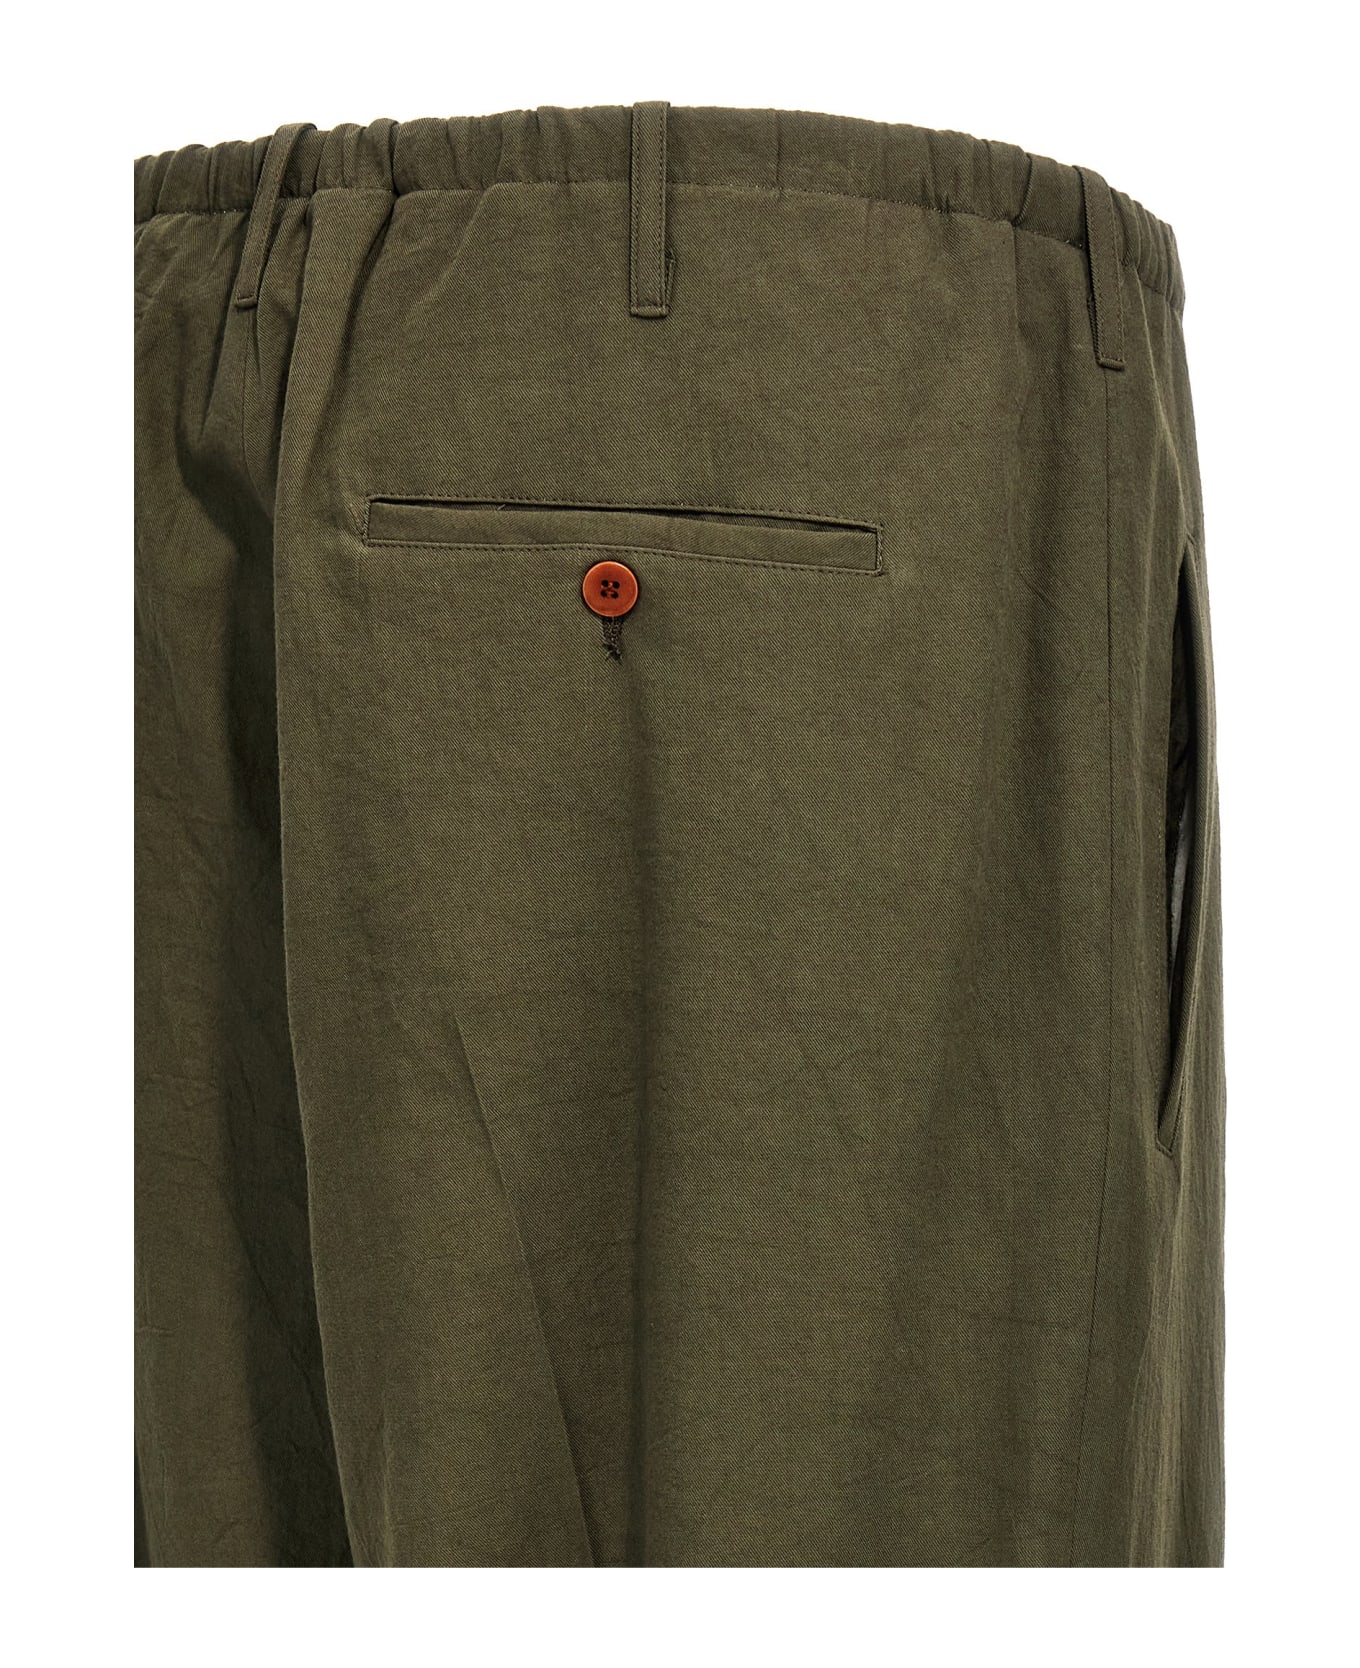 Magliano 'new People's' Pants - BROWN